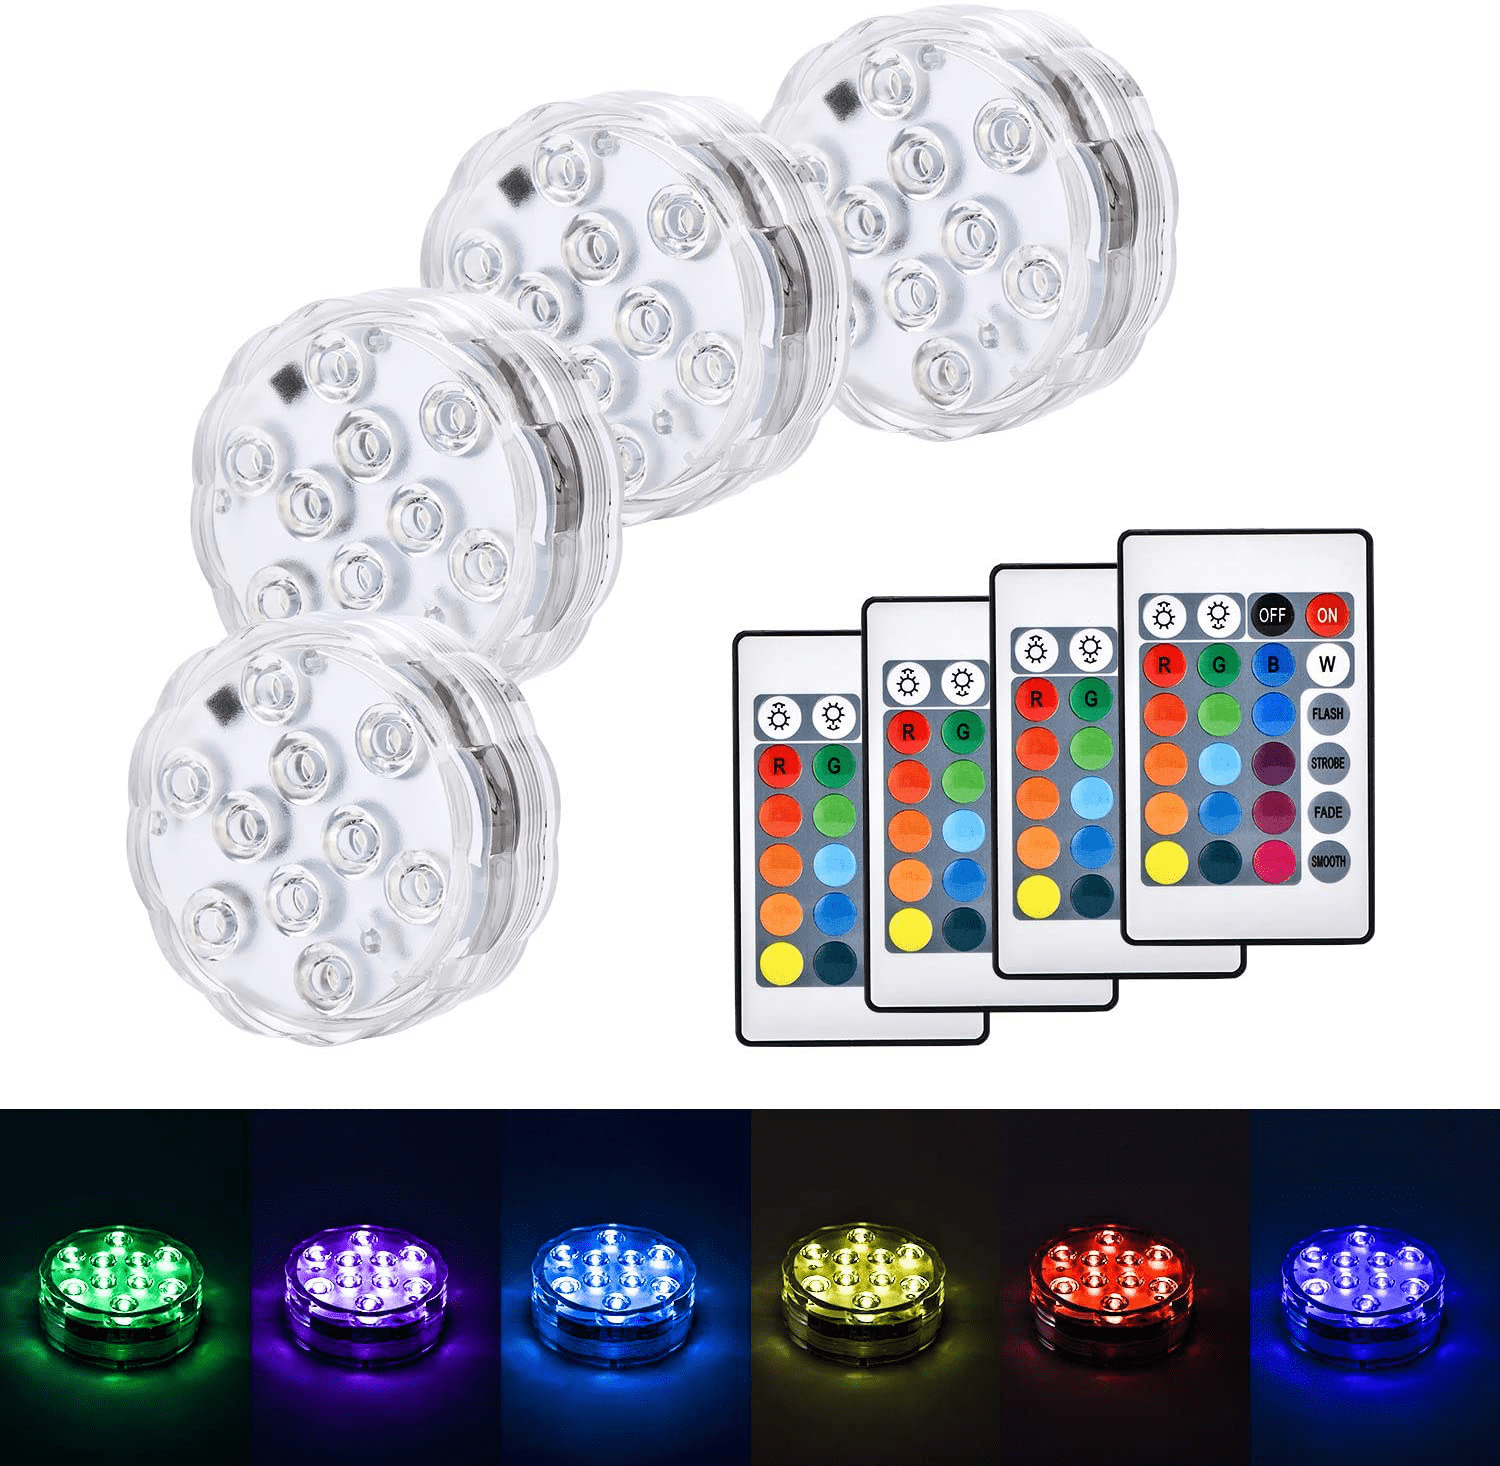 10pcs LED RGB Submersible Light Party Vase Lamp With Remote Control Waterproof 